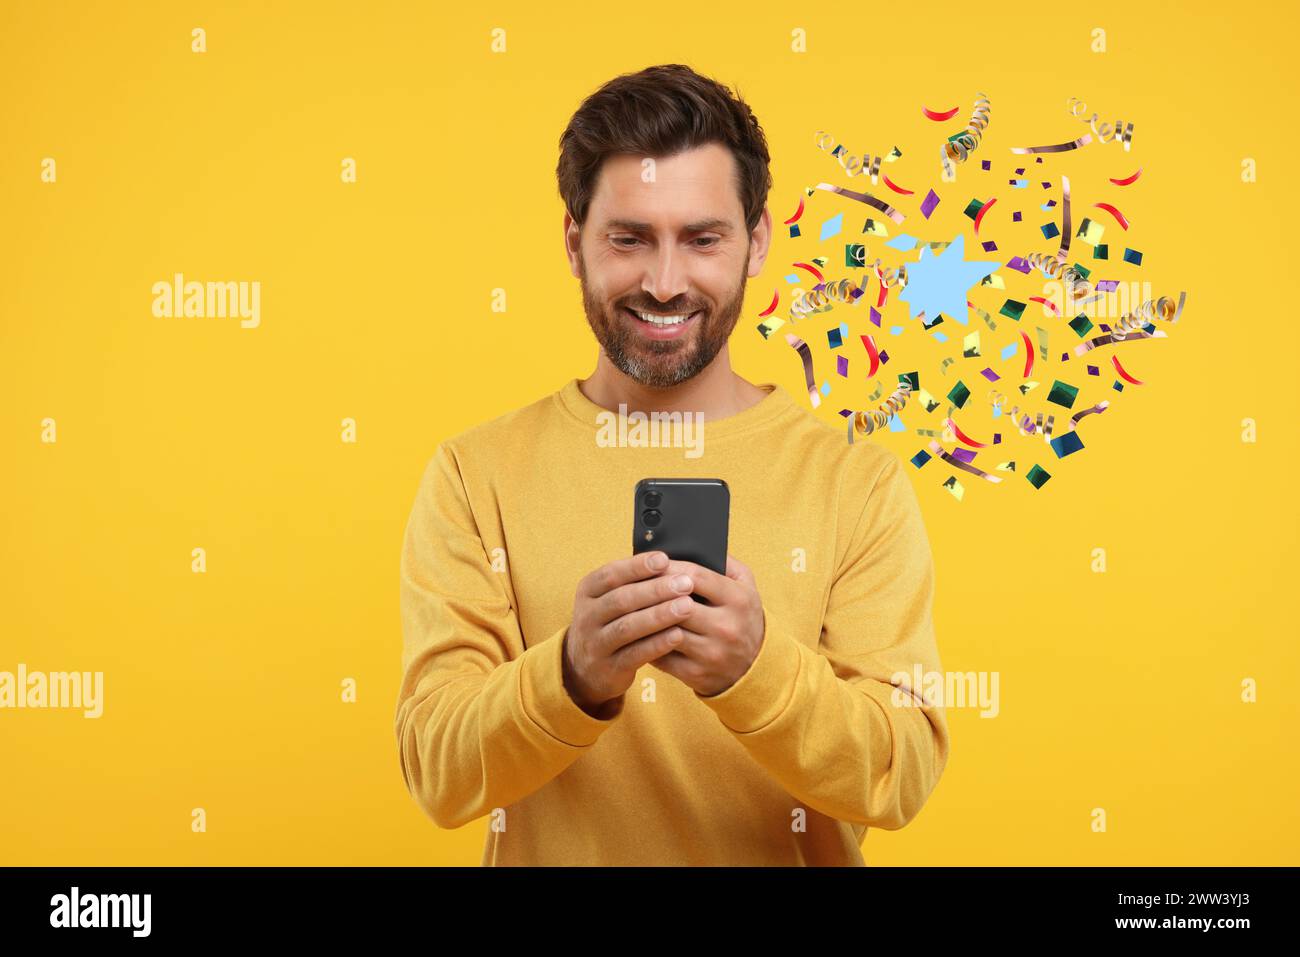 Discount offer. Happy man holding smartphone on yellow background. Confetti and streamers near him Stock Photo